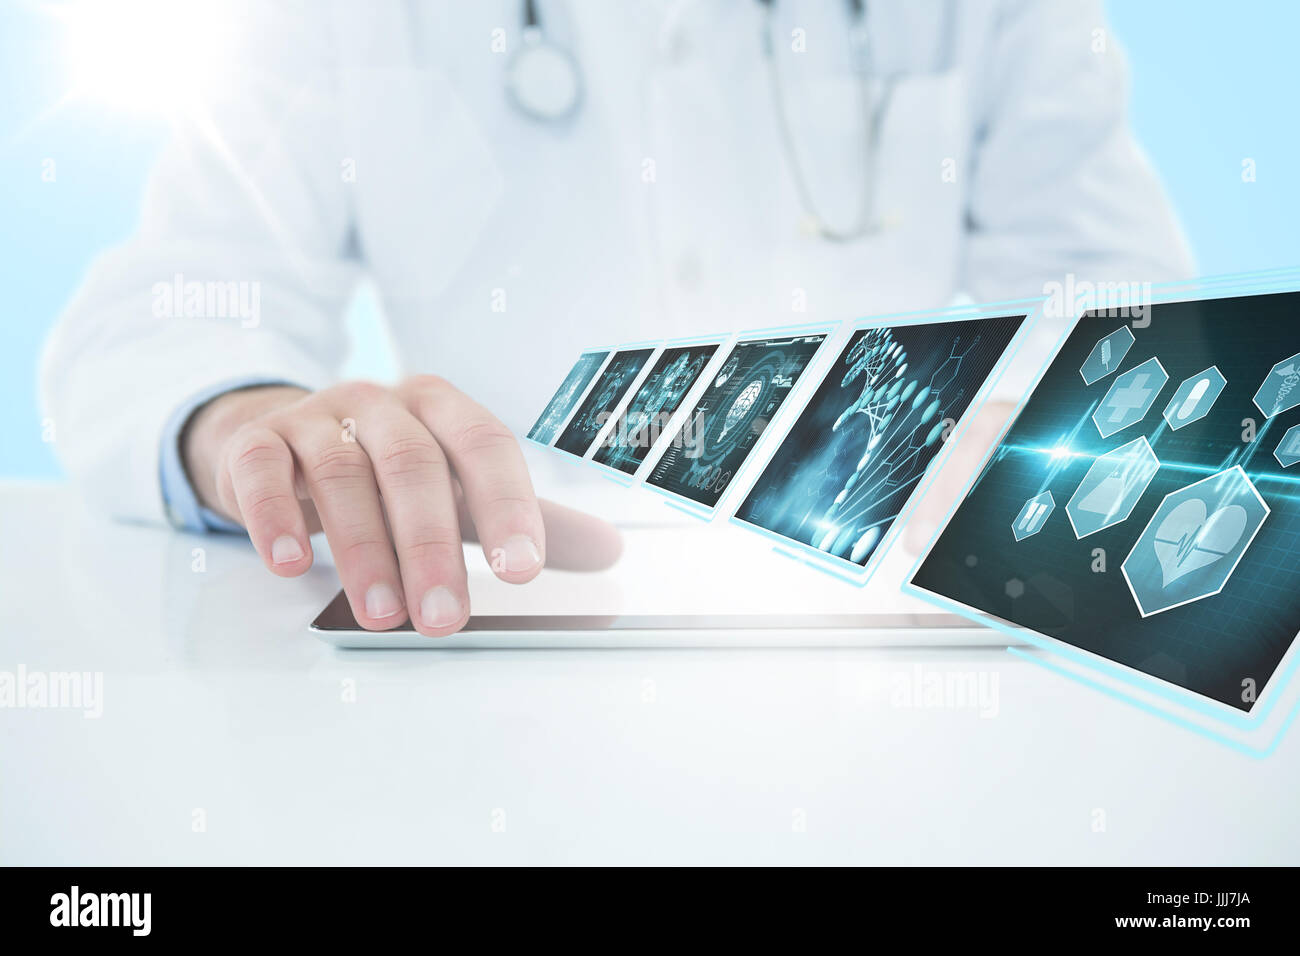 Composite 3d image of doctor using digital tablet against white background Stock Photo